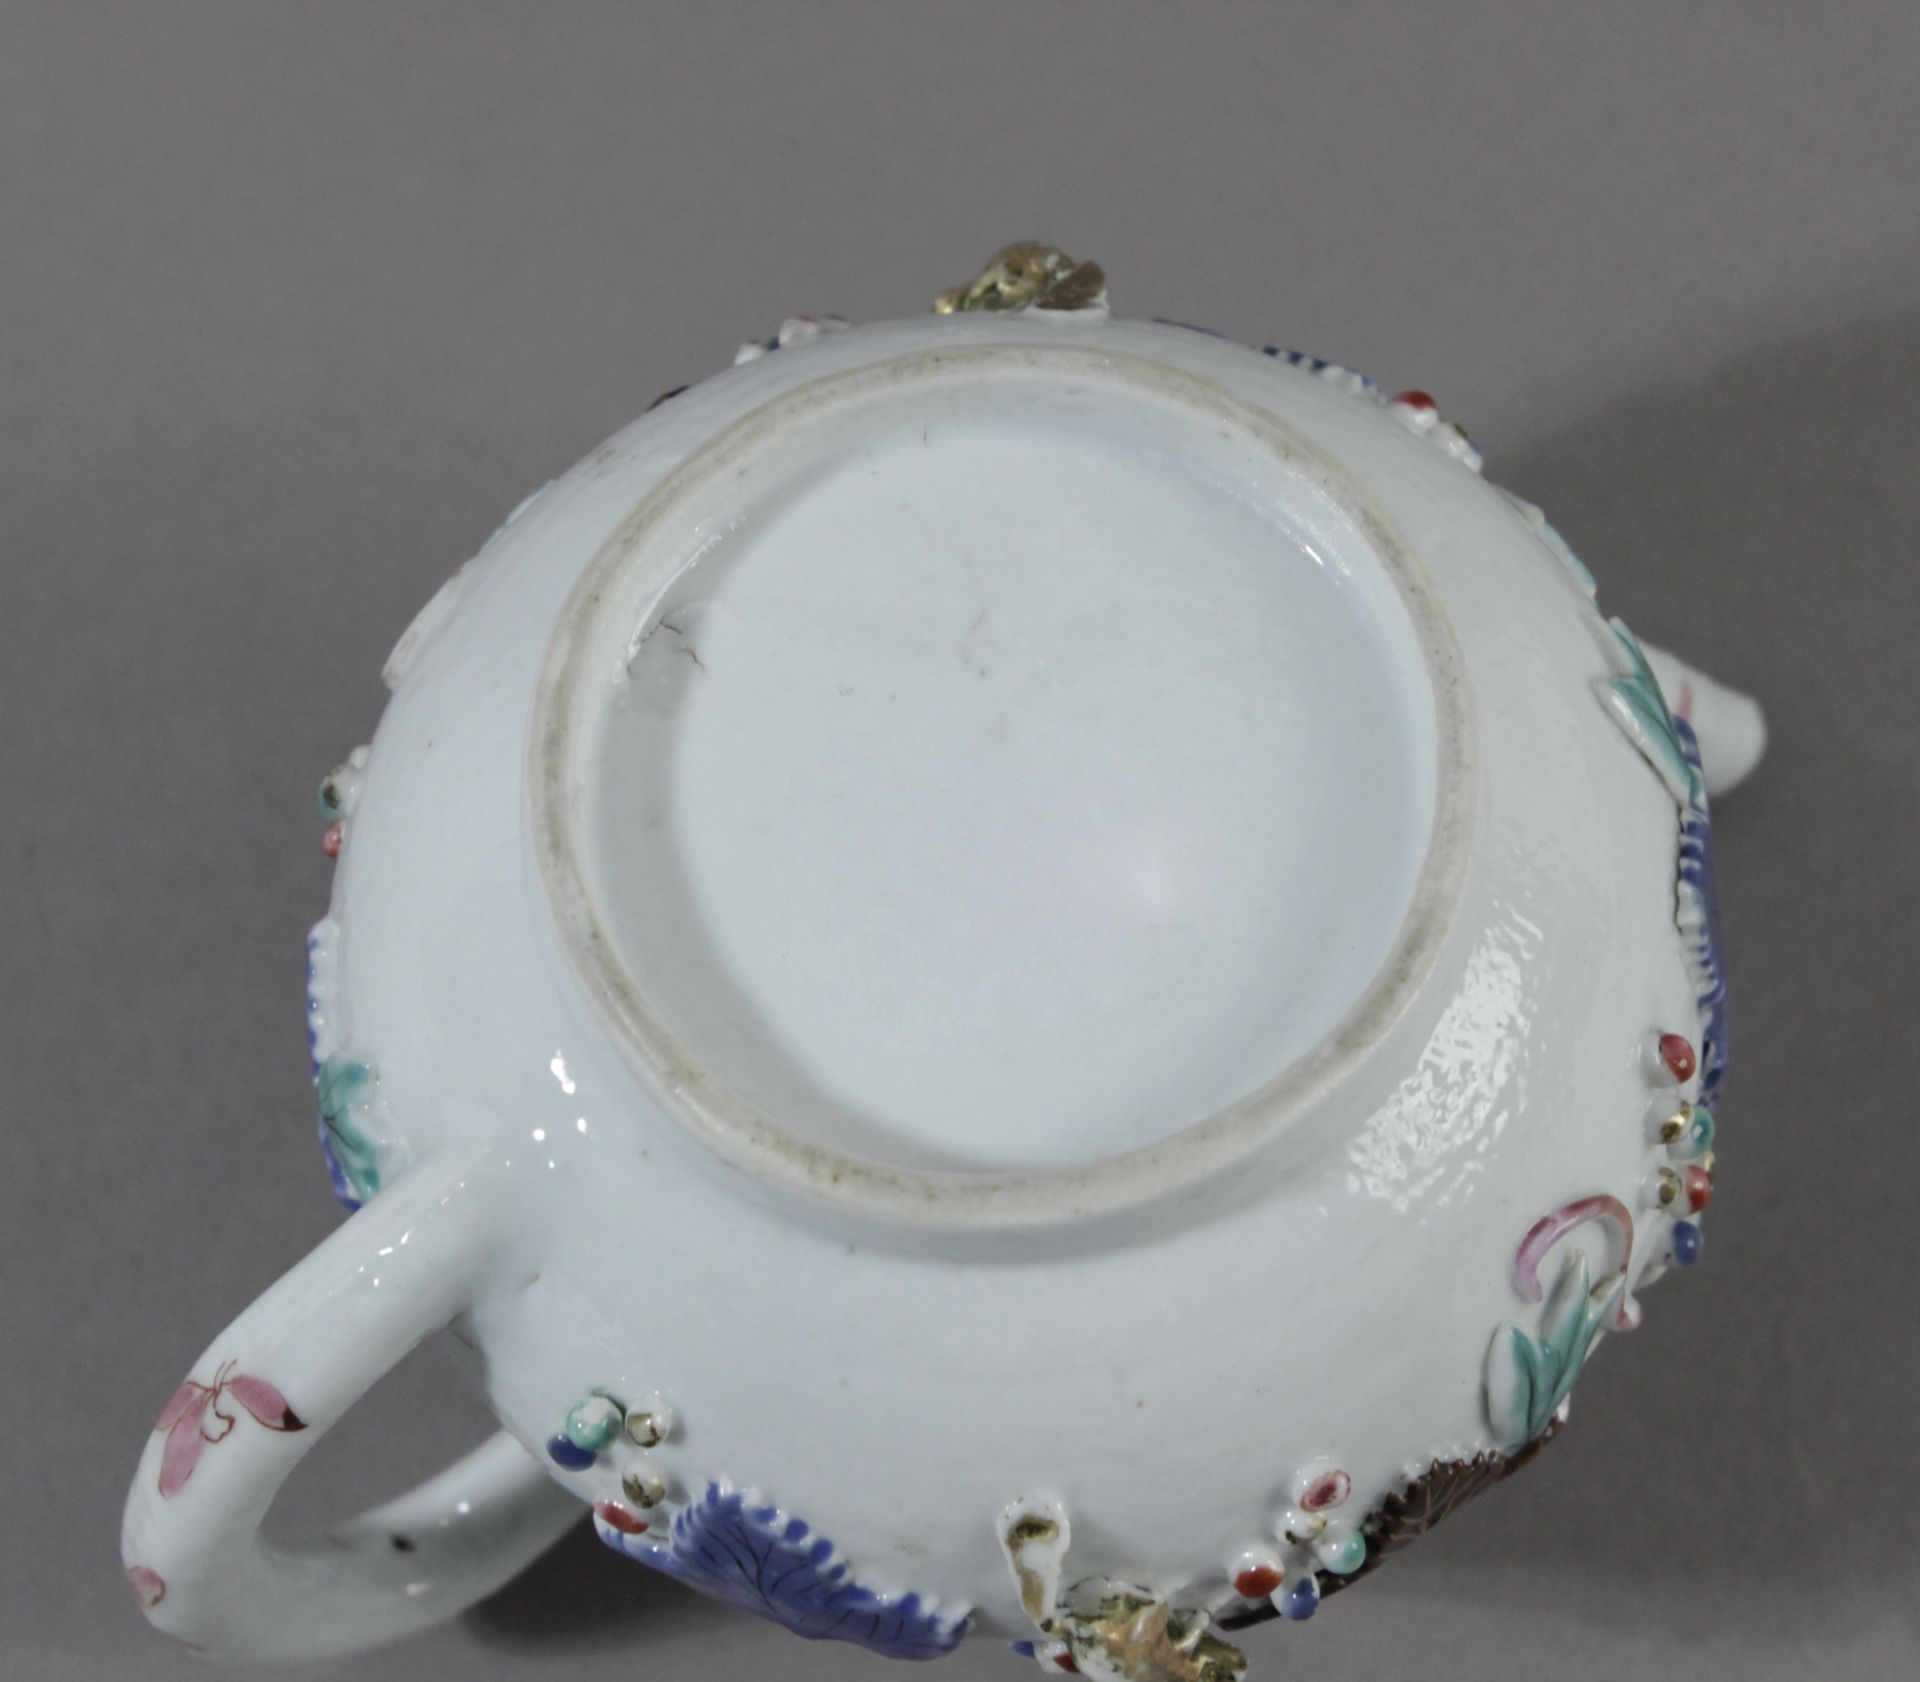 An 18th century Chiense porcelain teapot from Yongzheng period - Image 3 of 5